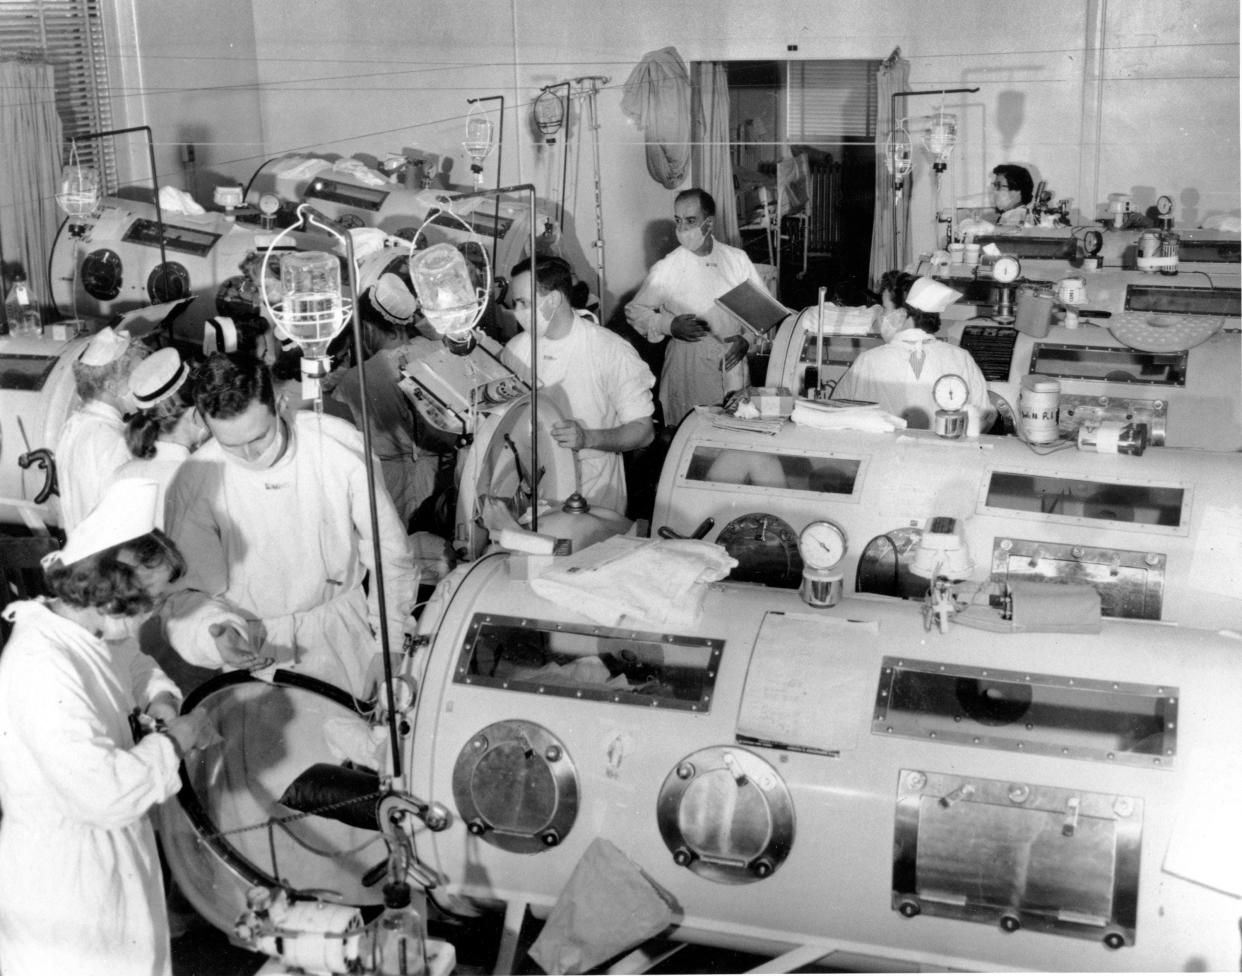 An image of the emergency polio ward at Haynes Memorial Hospital in Boston in 1955, showing critical victims lined up in iron lung respirators. The coffin-like devices helped those whose bodies were crippled by polio breathe artificially. Later in 1955, Jonas Salk discovered the vaccine for polio, which today has been eradicated from all but three countries.